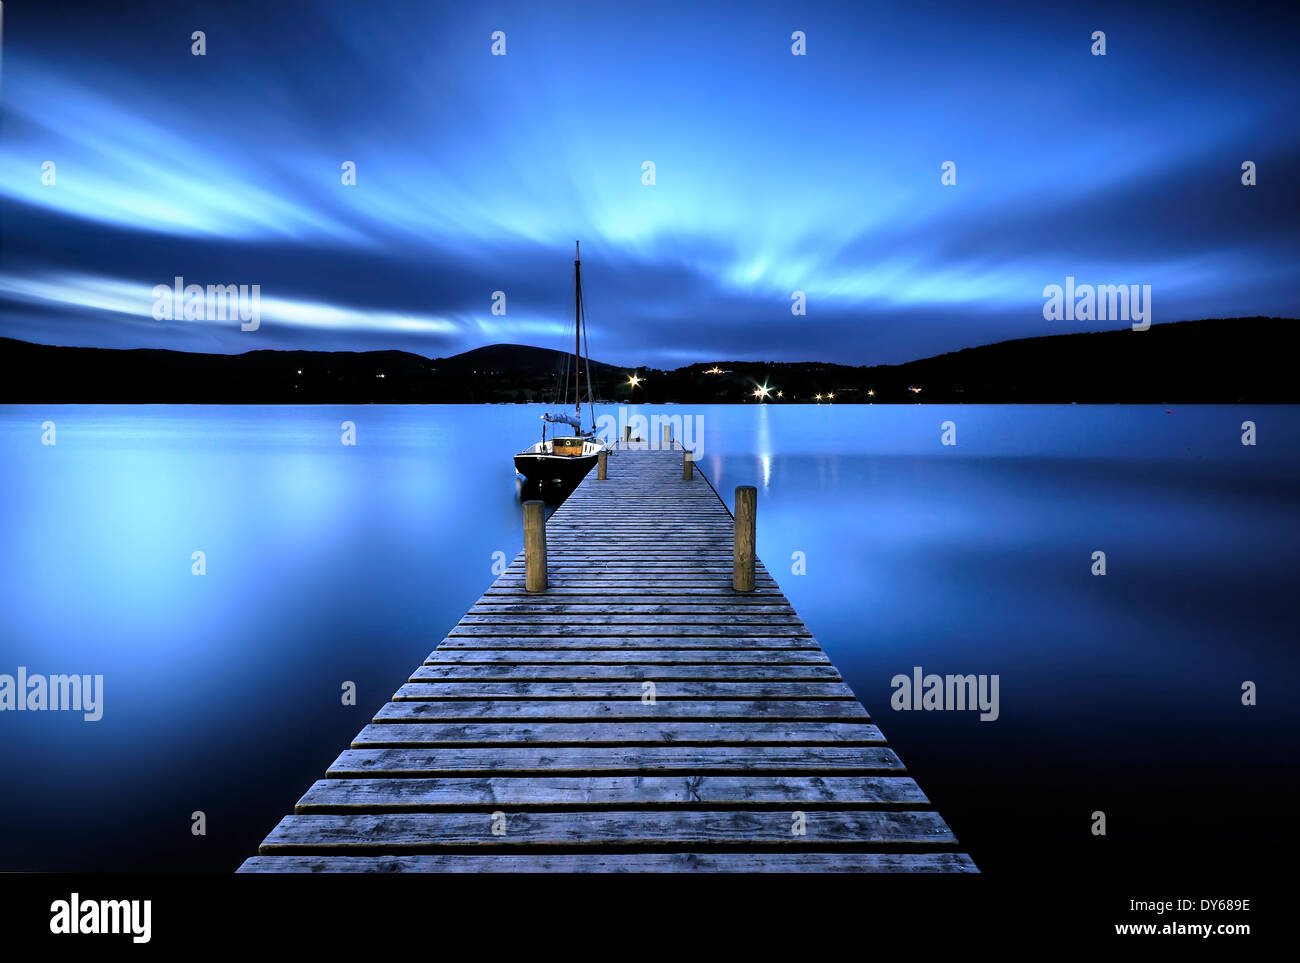 ullswater pier and boat at night in the lake district Stock Photo